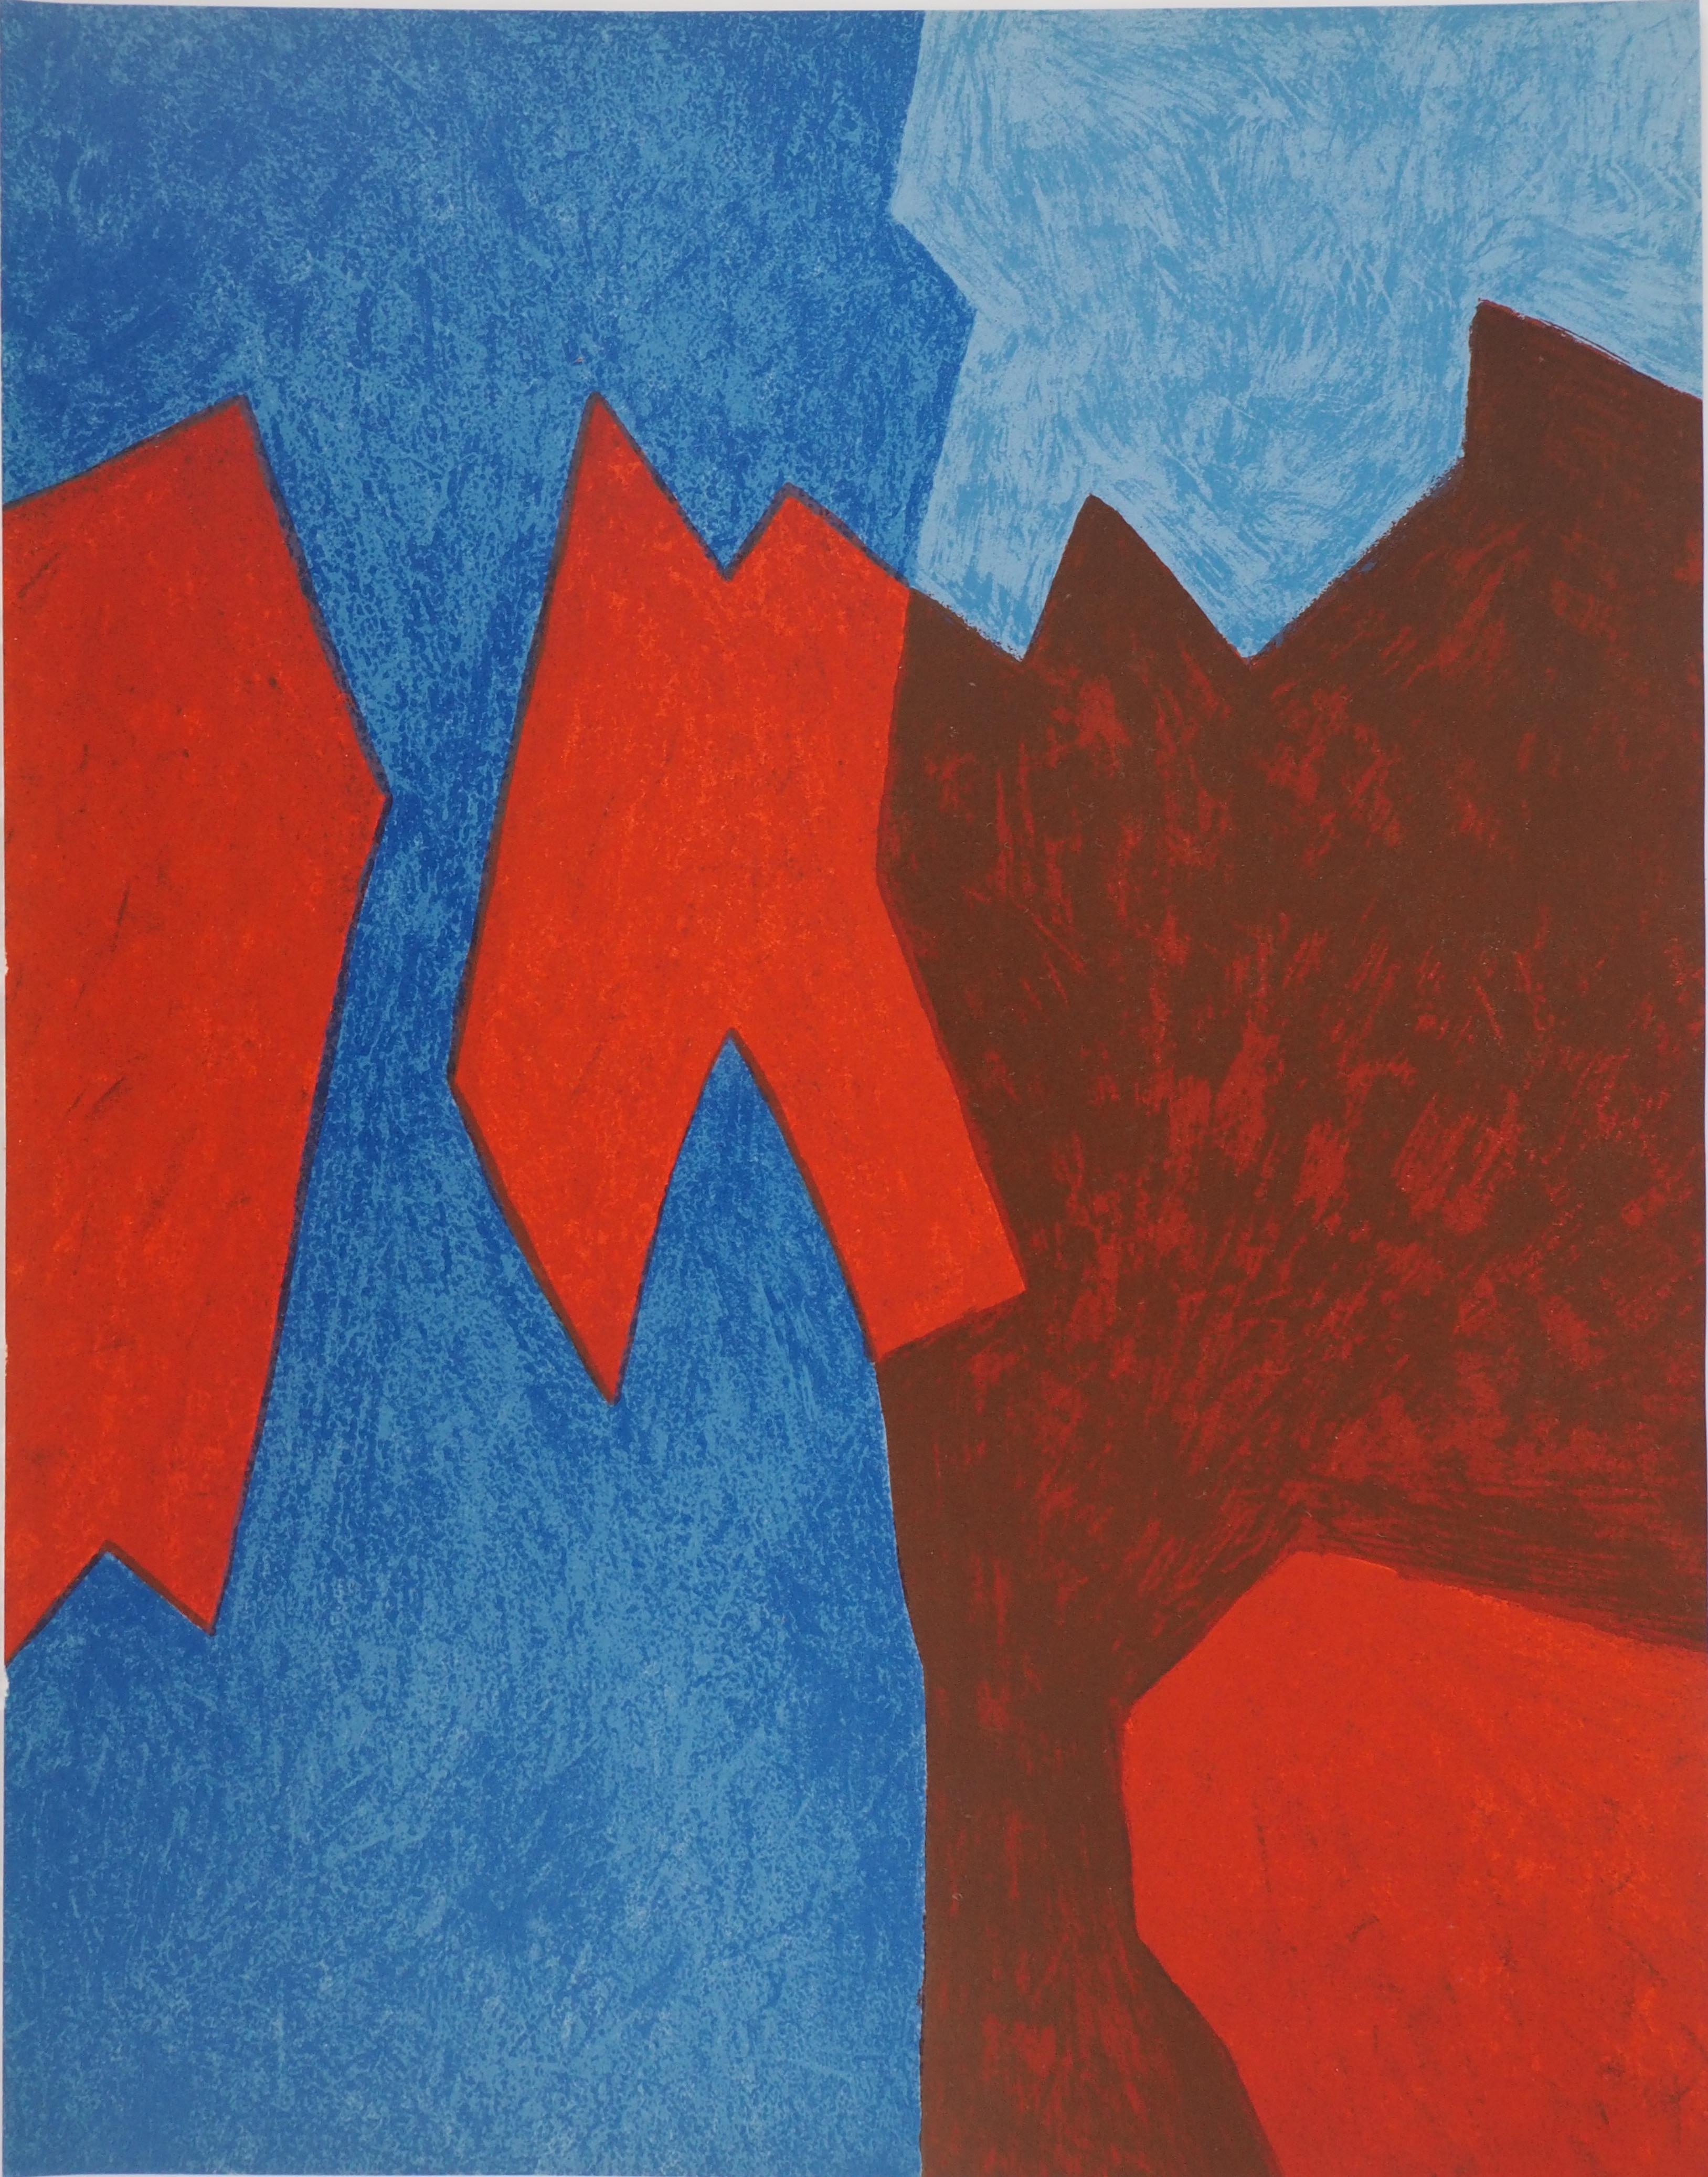 Serge Poliakoff Abstract Print - Composition in Blue and Red - Original lithograph (Mourlot 1968)